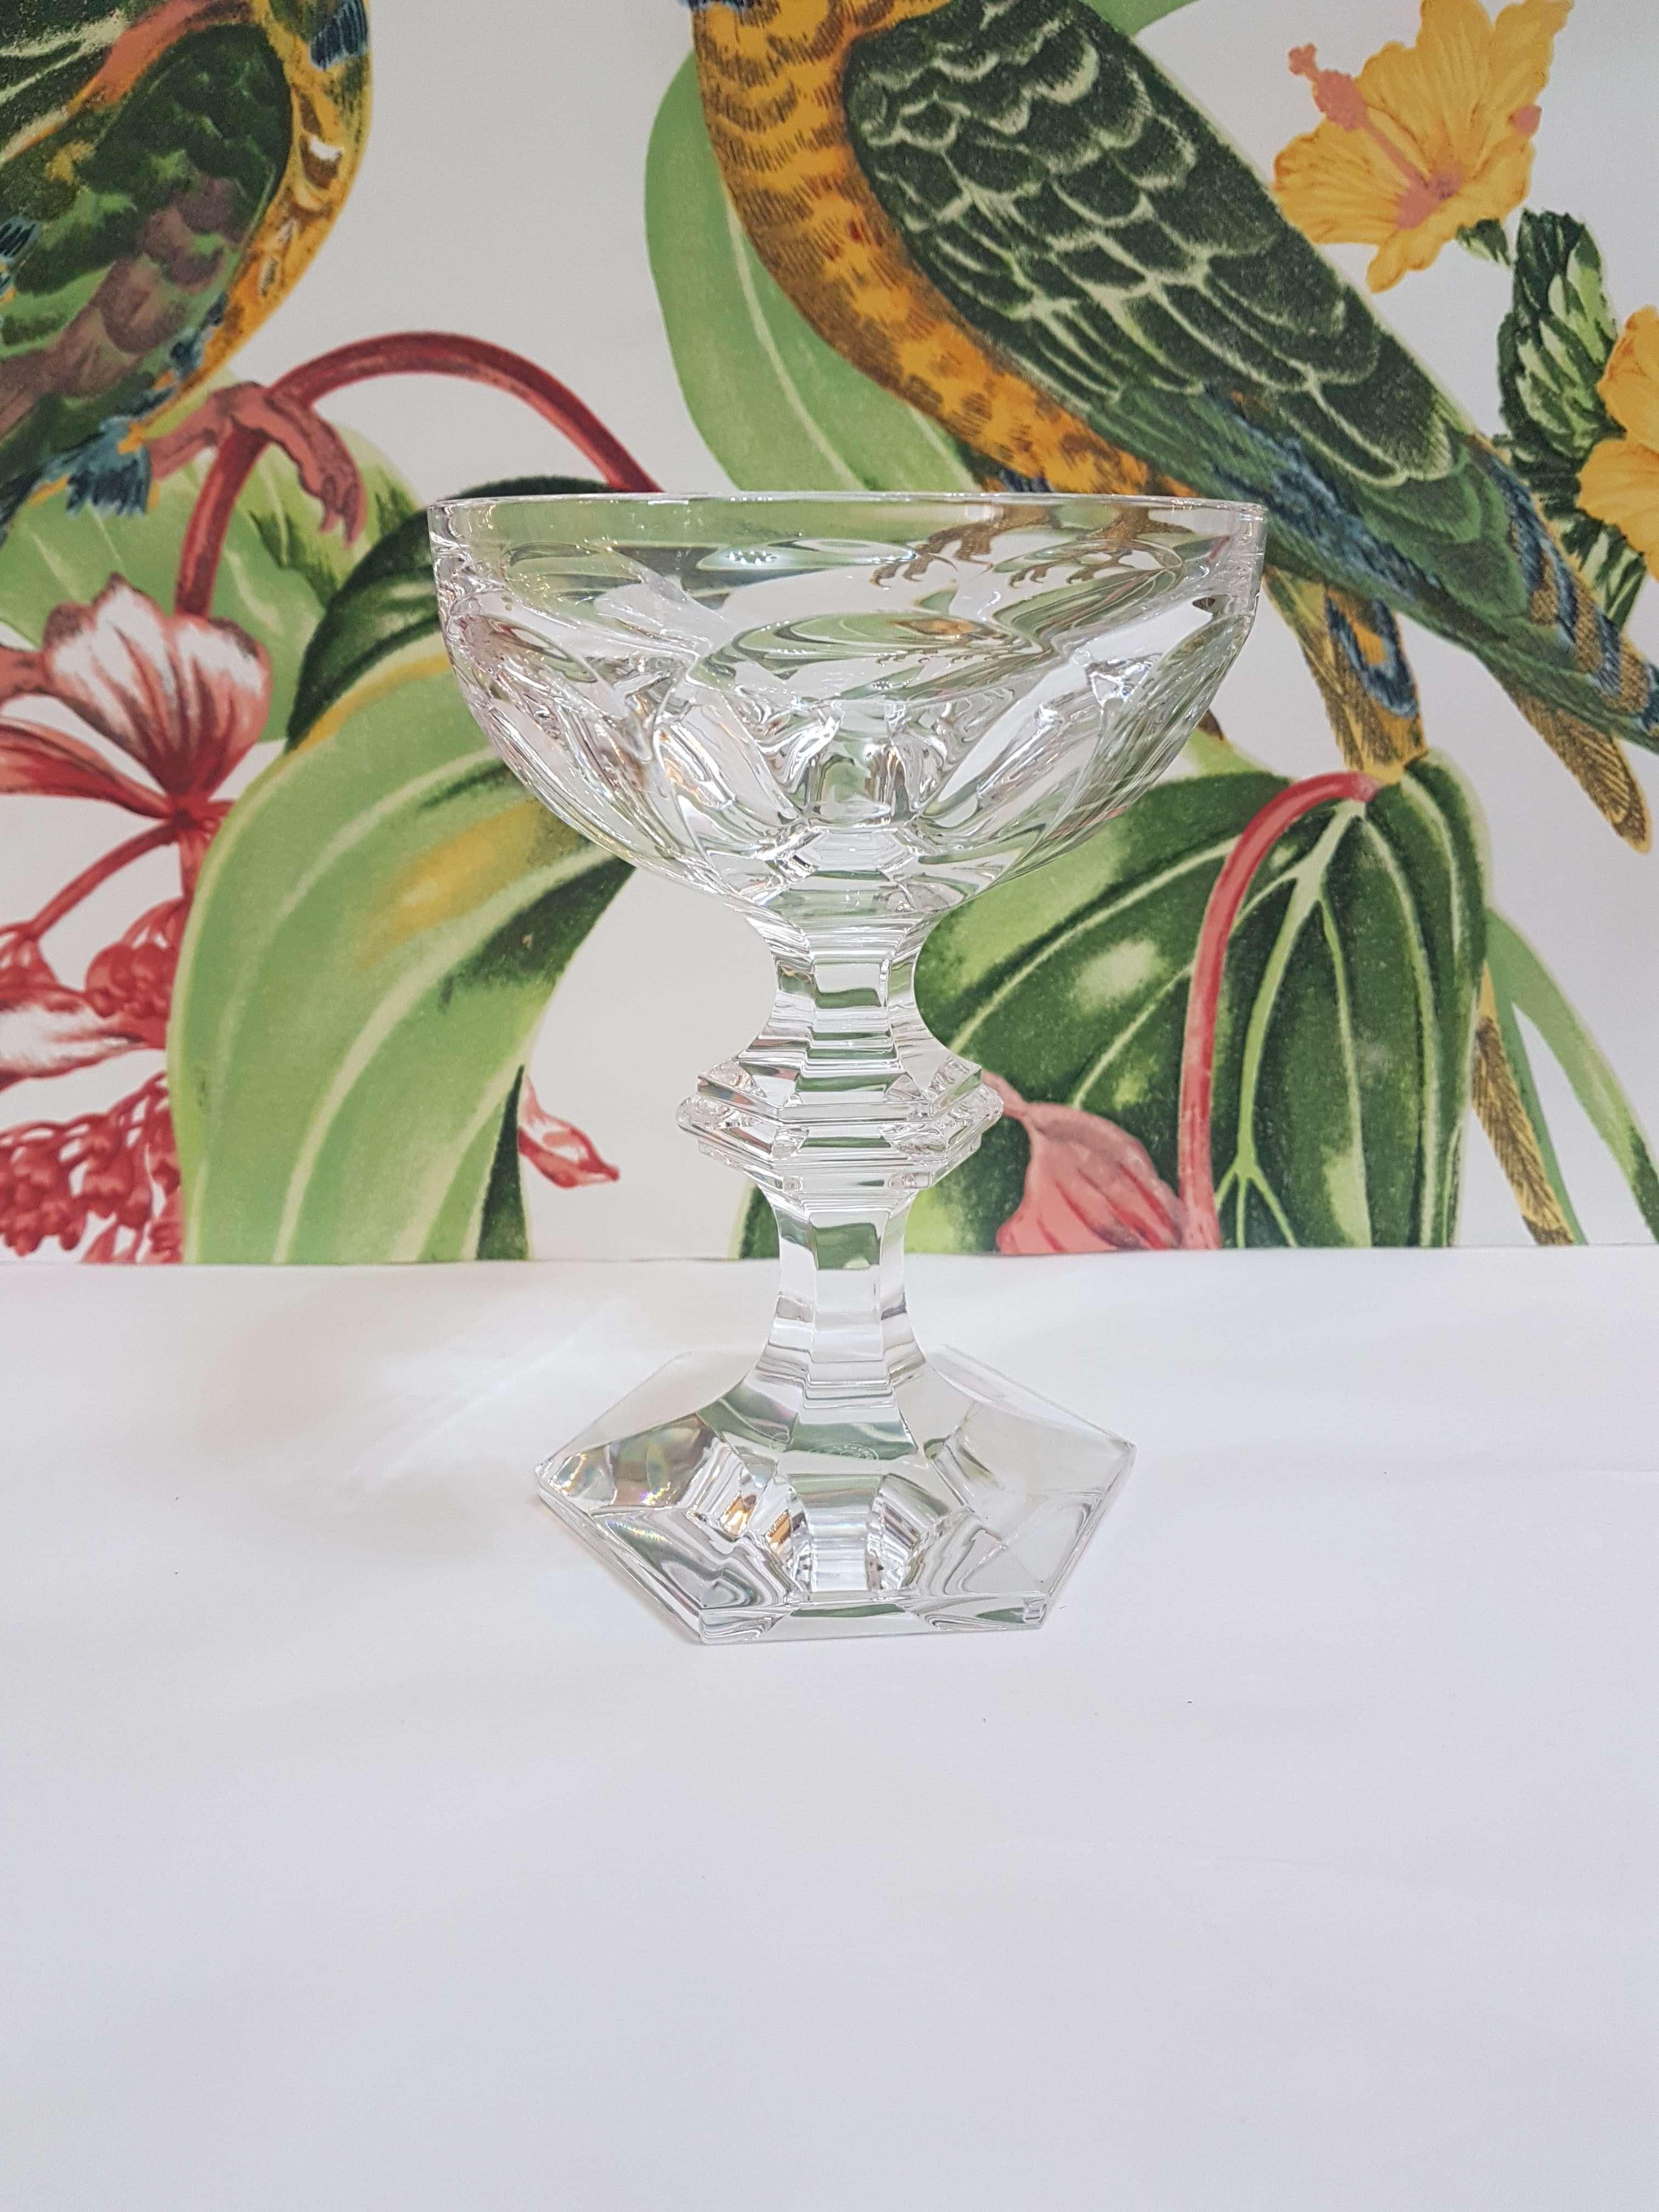 The Harcourt 1841 collection has also been a staple of French power, selected since the age of Napoleon III to its contemporary use in the Palais de l’Élysée. The Harcourt 1841 glass is characterized by its architectural form: a stunning shape from